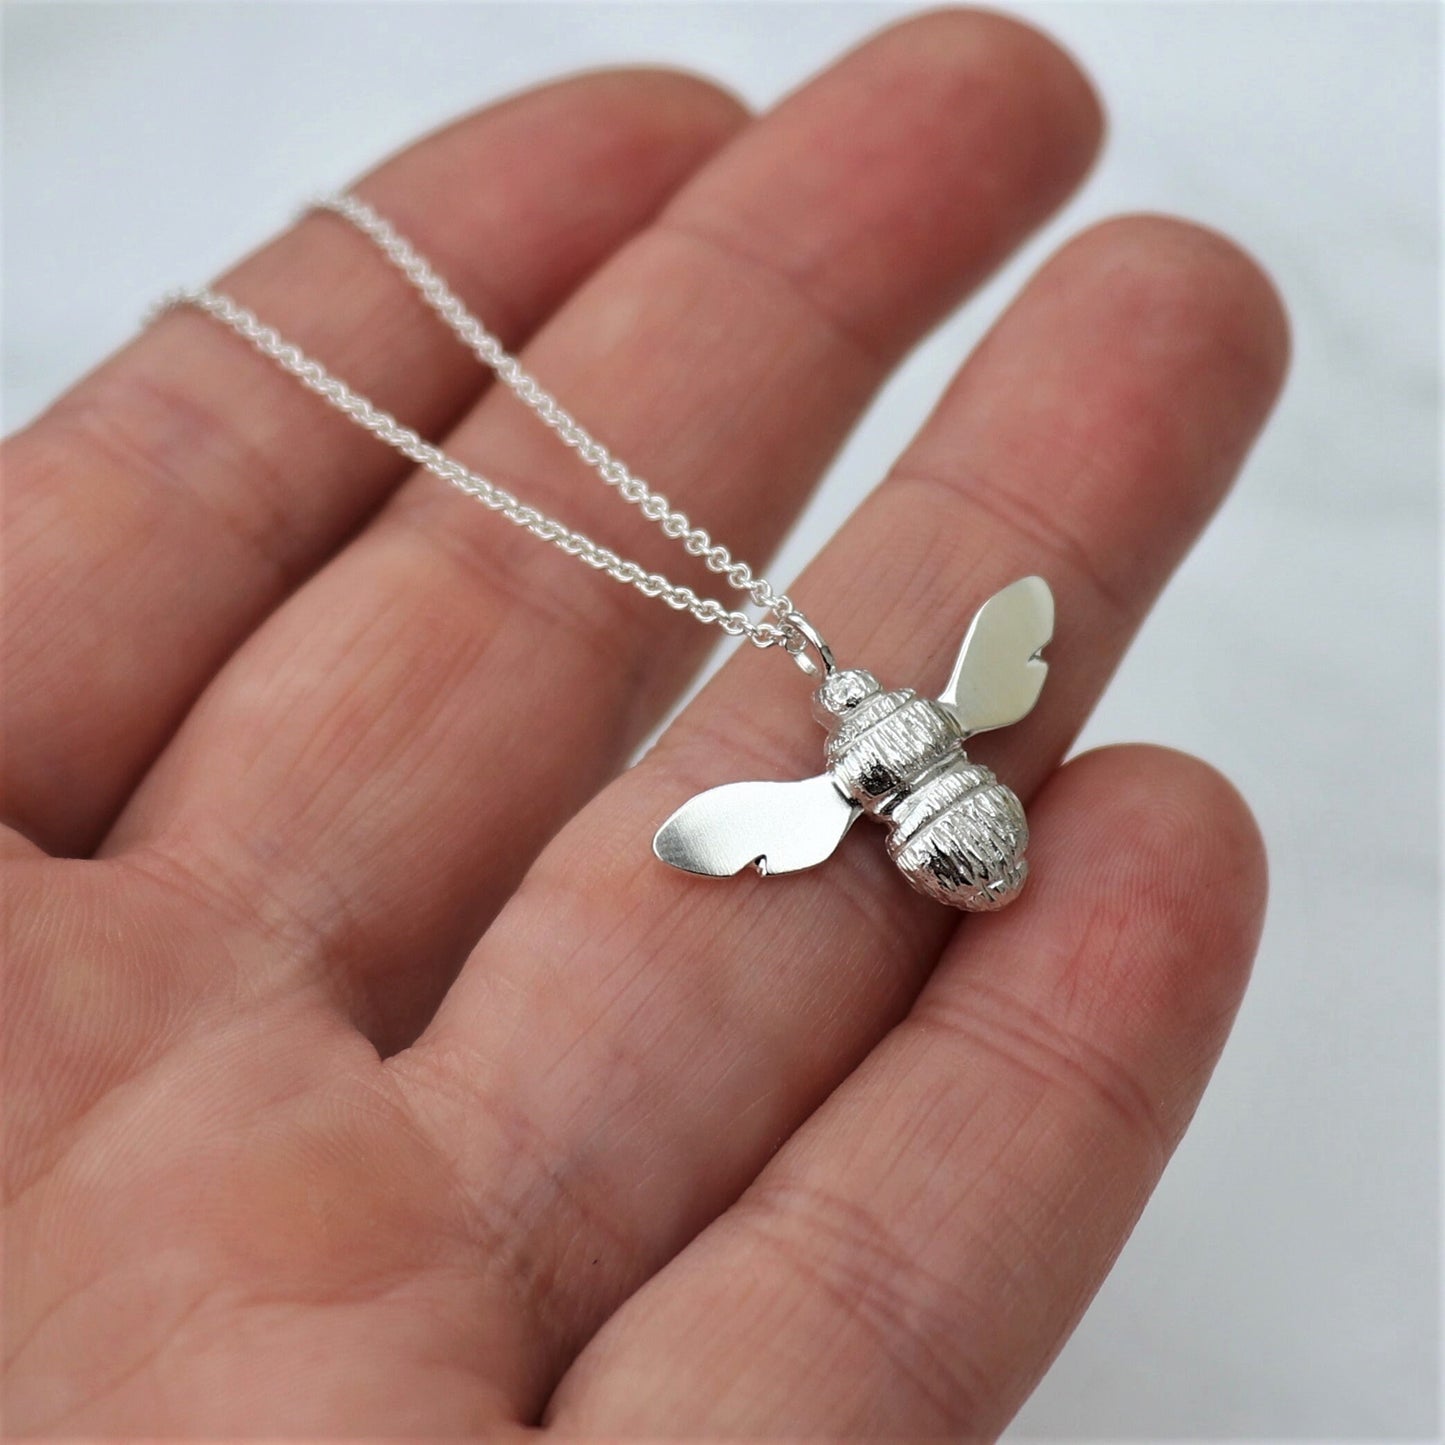 Solid silver garden bumblebee pendant on a  1.2mm wide trace chain